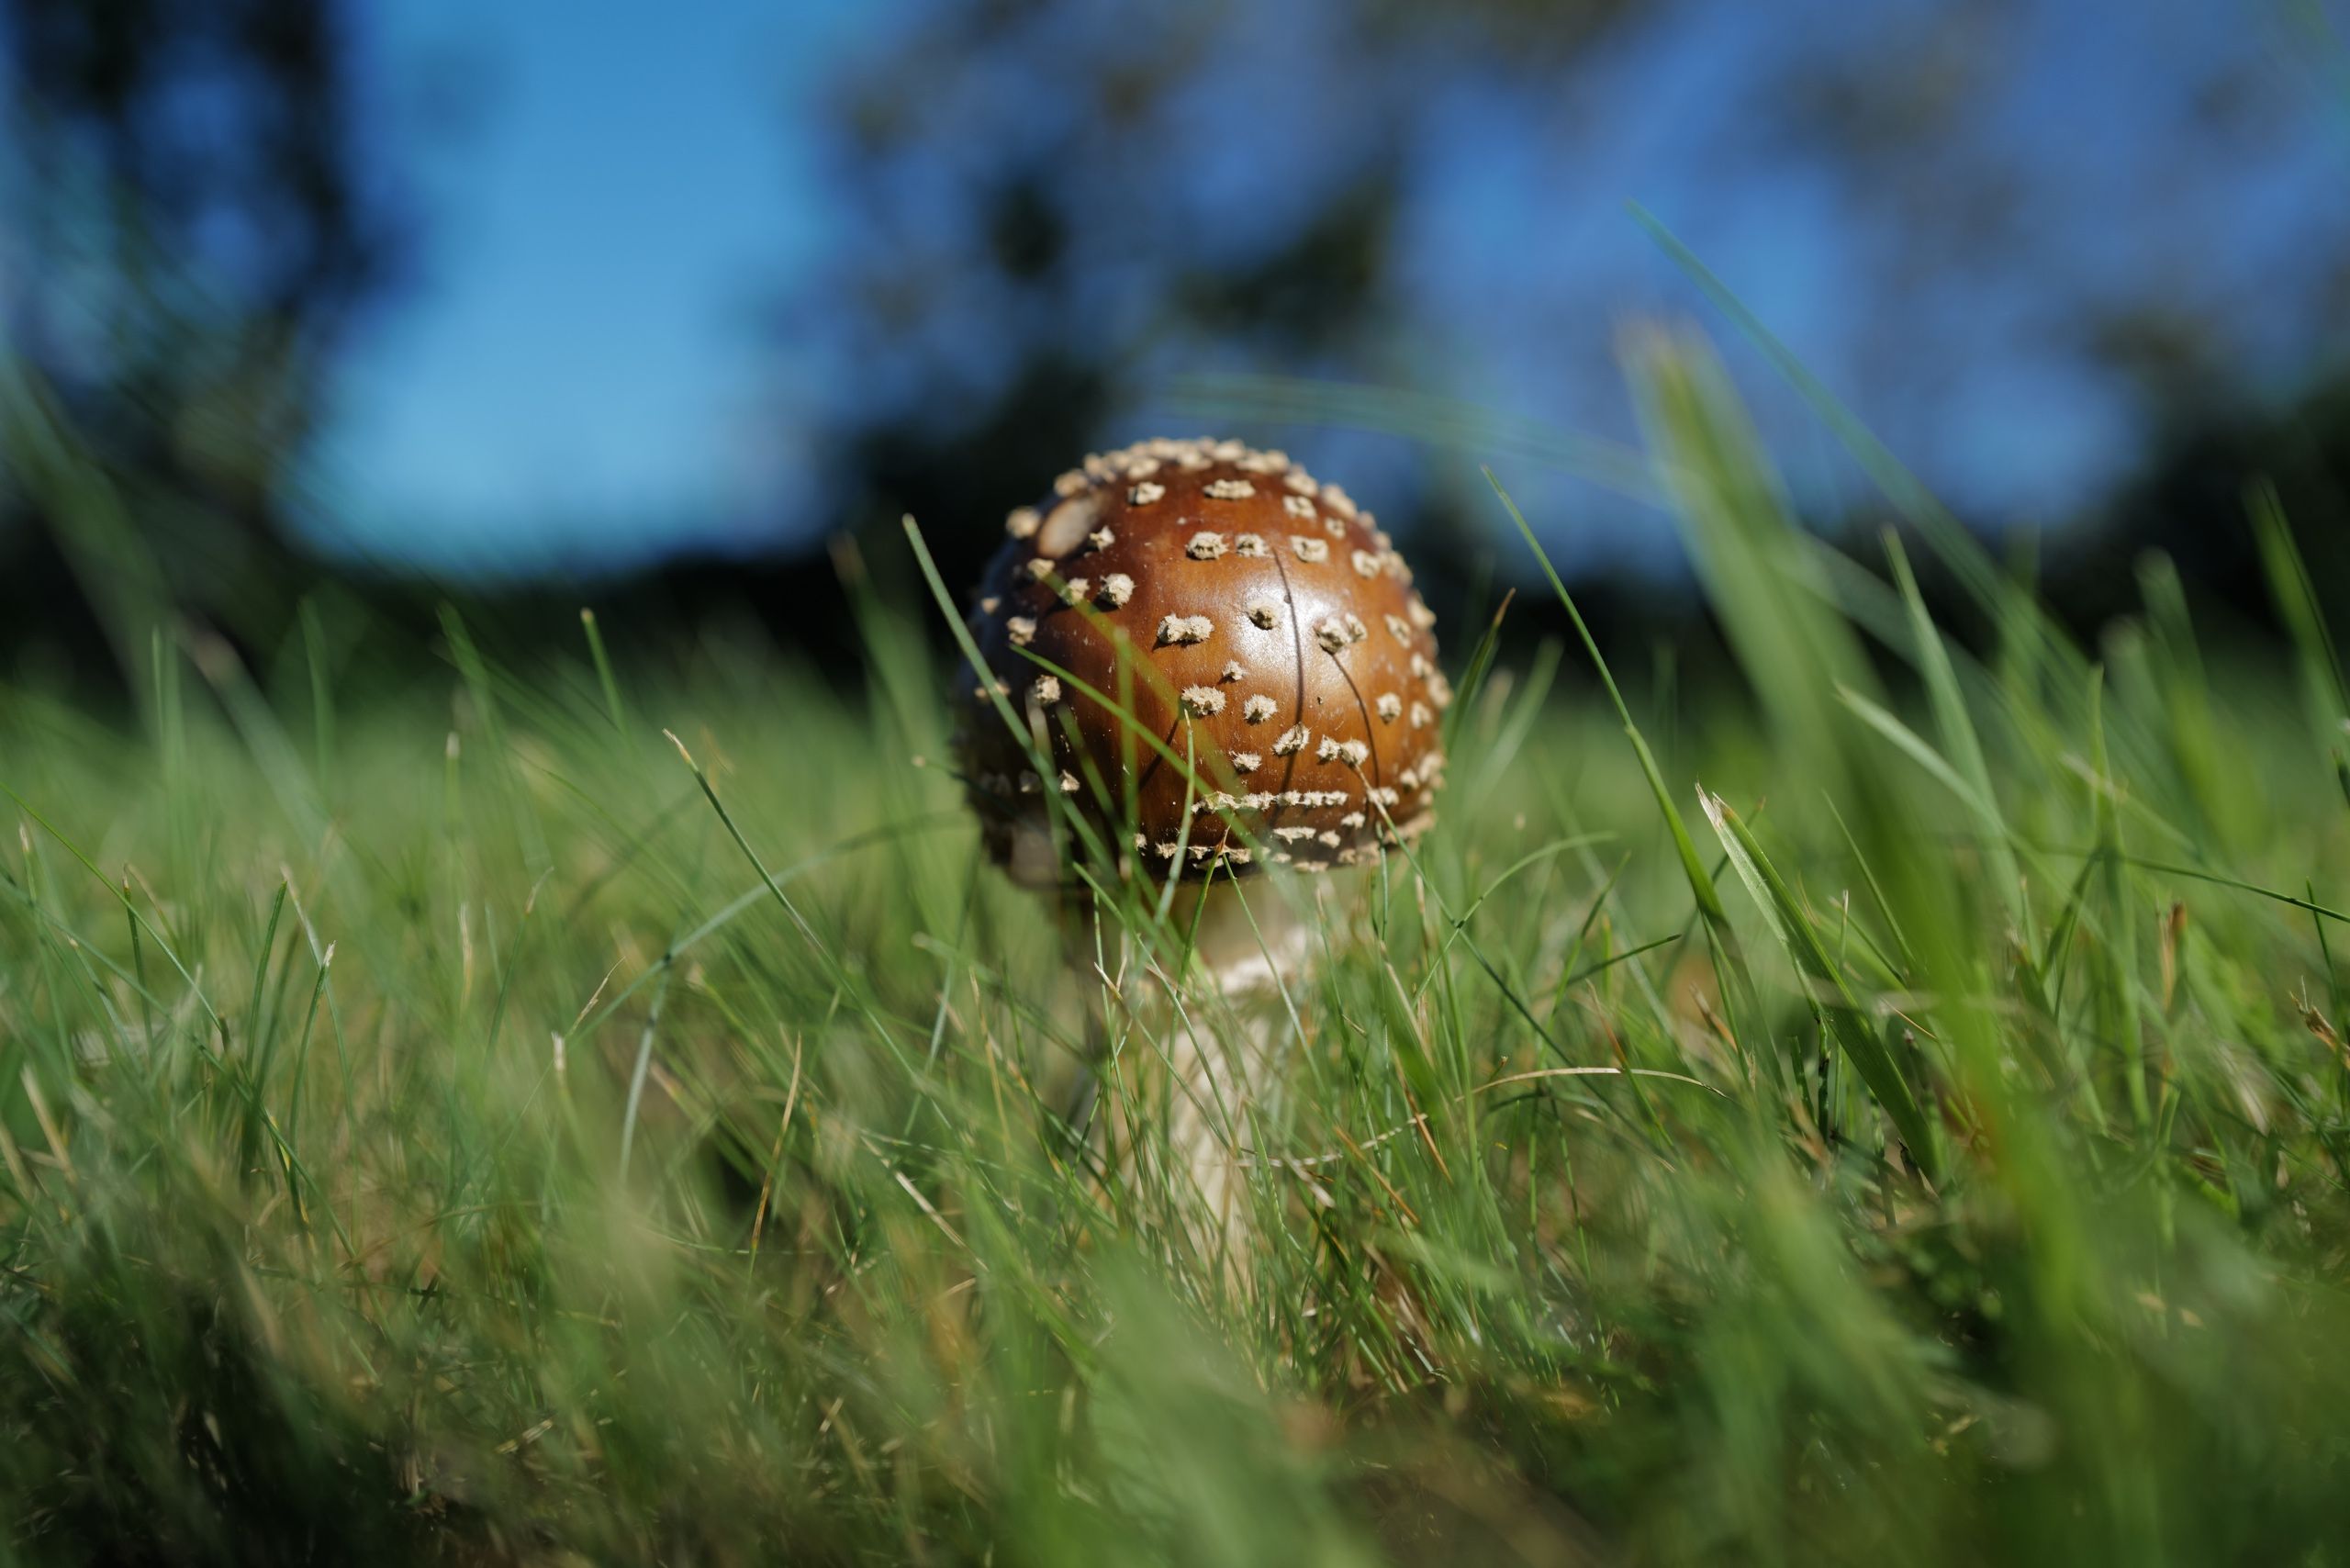 A spotted brown mushroom grows in the grass